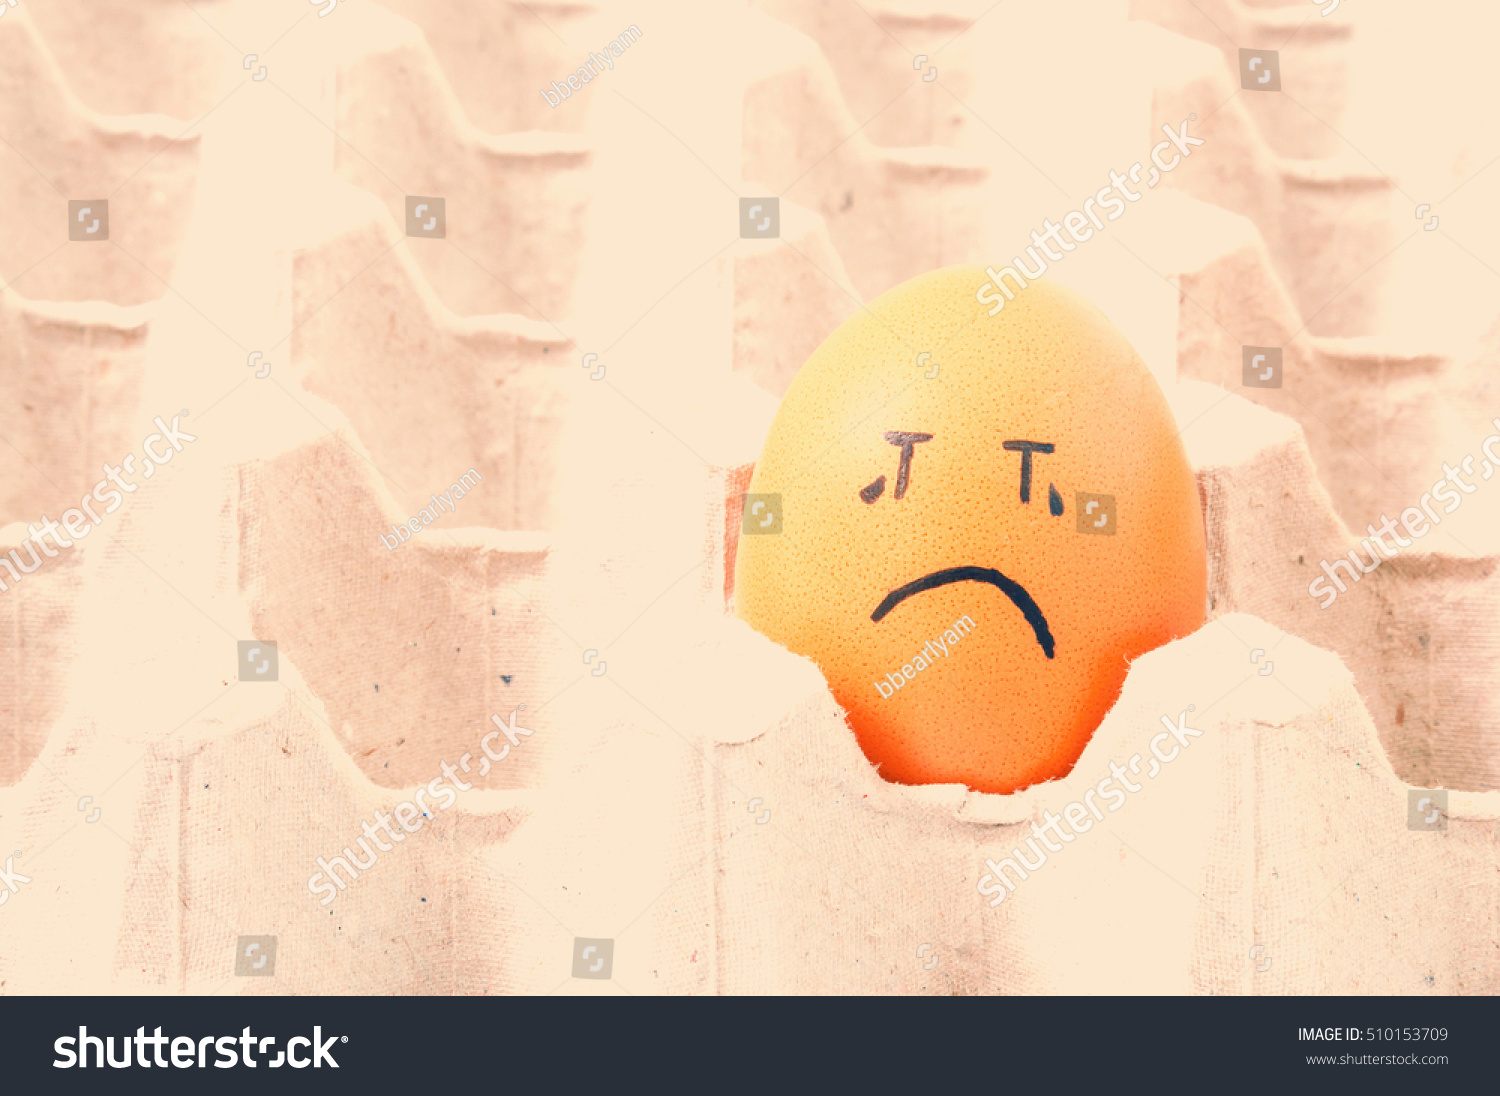  brown eggs face crying arranged in carton #510153709